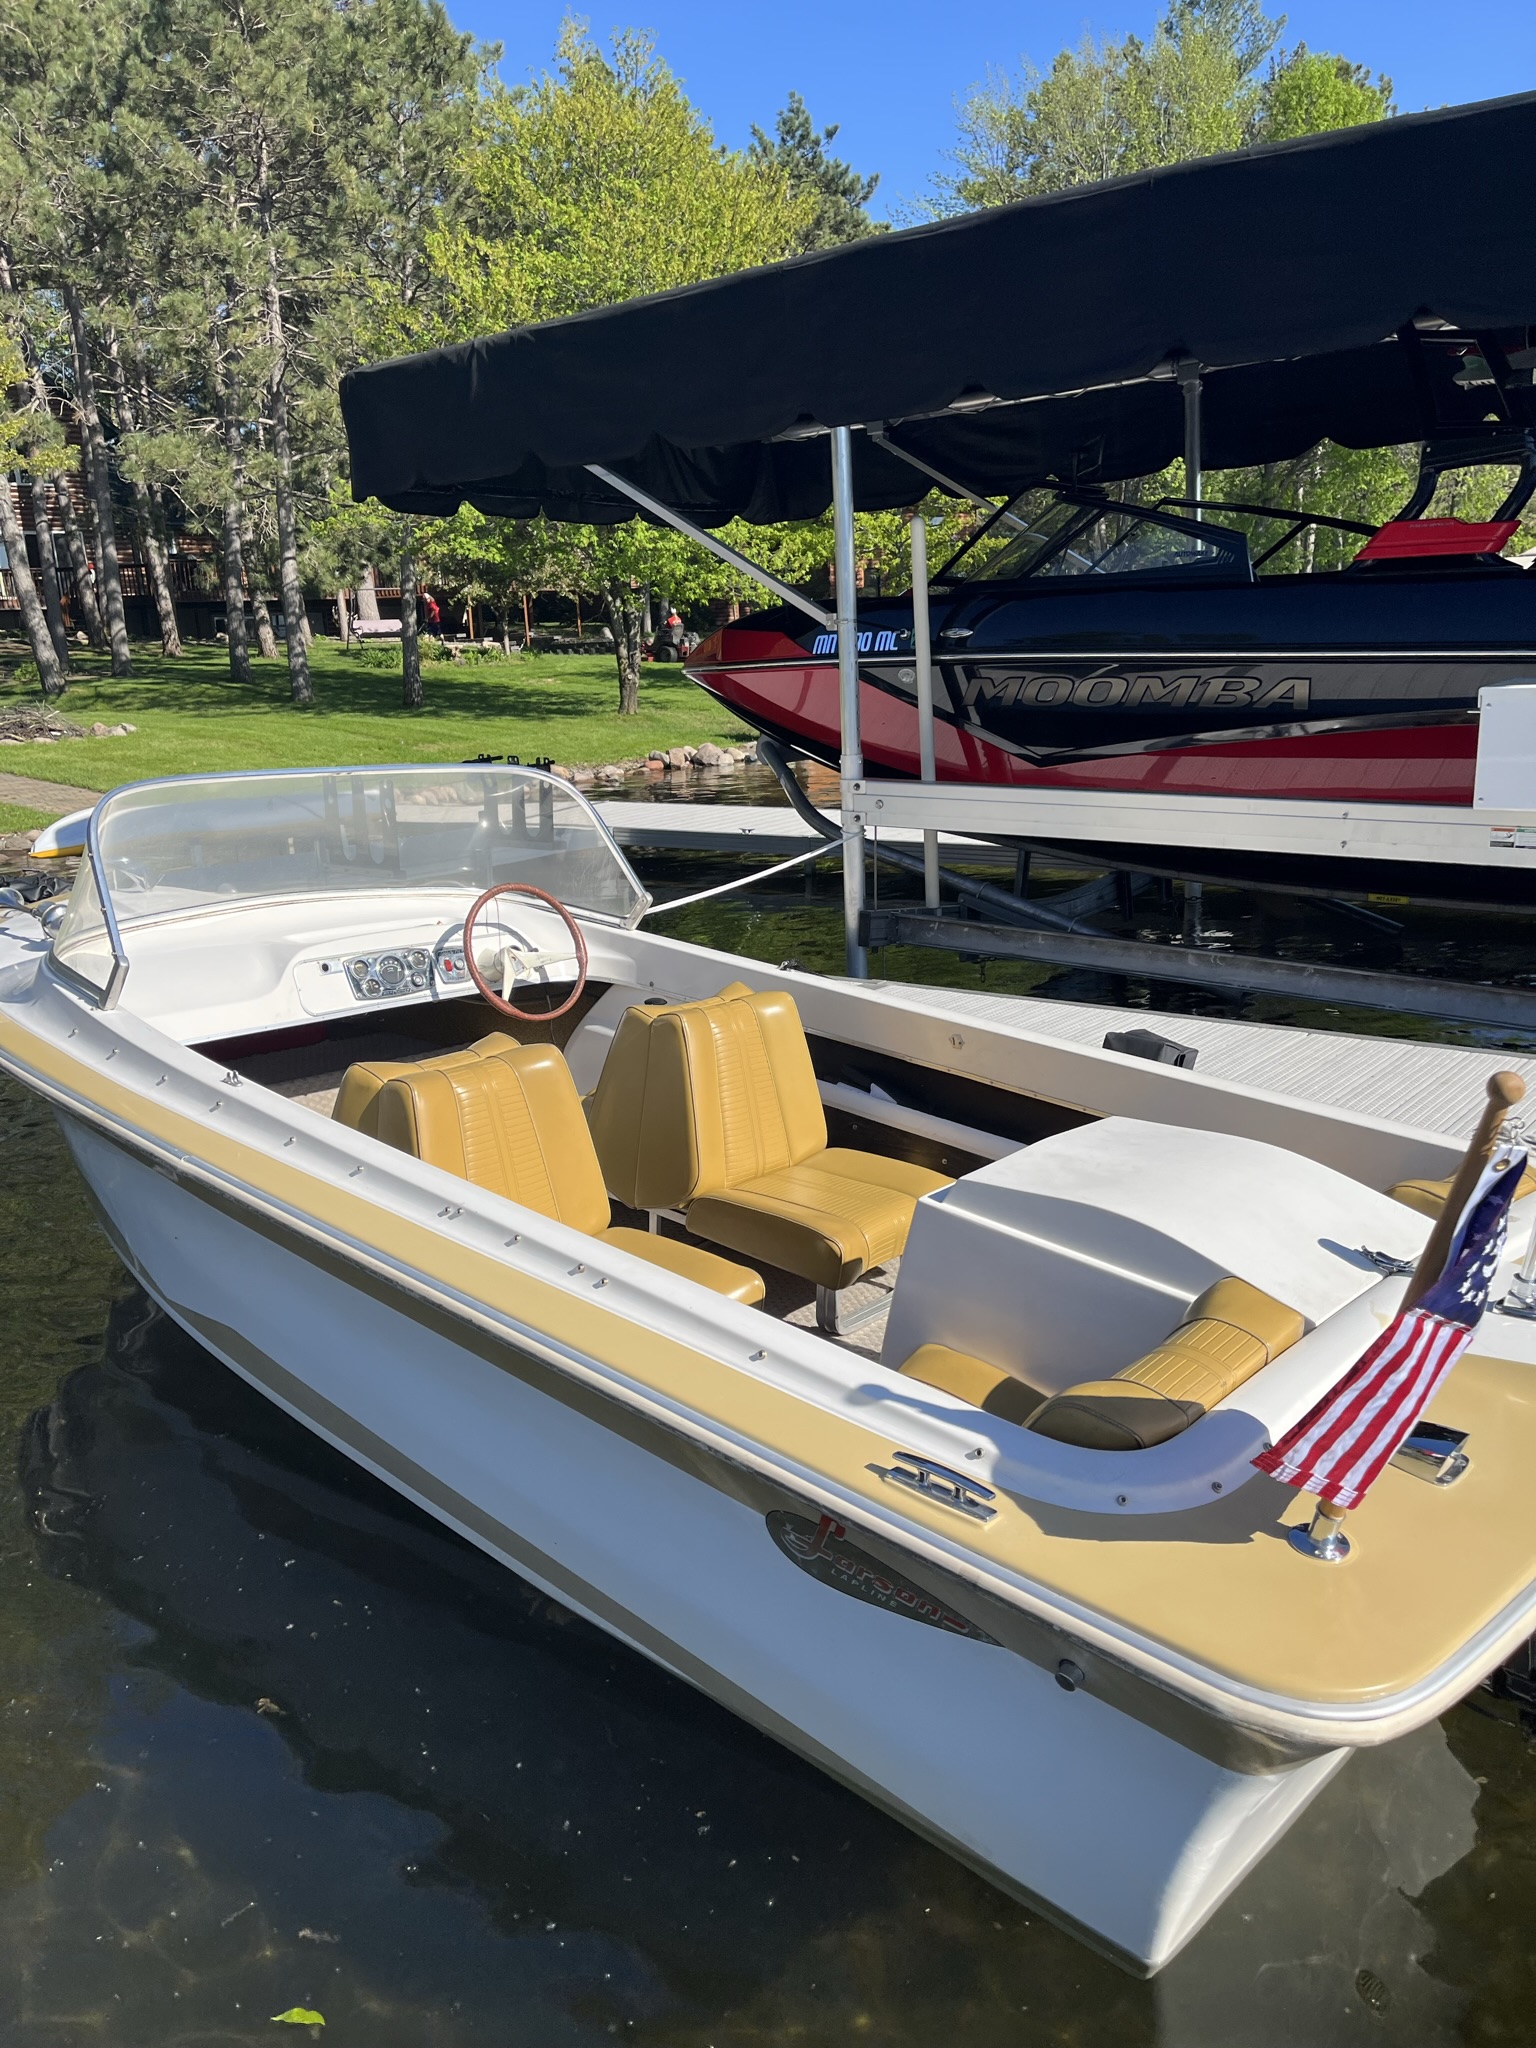 1966 17 foot Larson All American  Small boat for sale in Crosslake, MN - image 4 